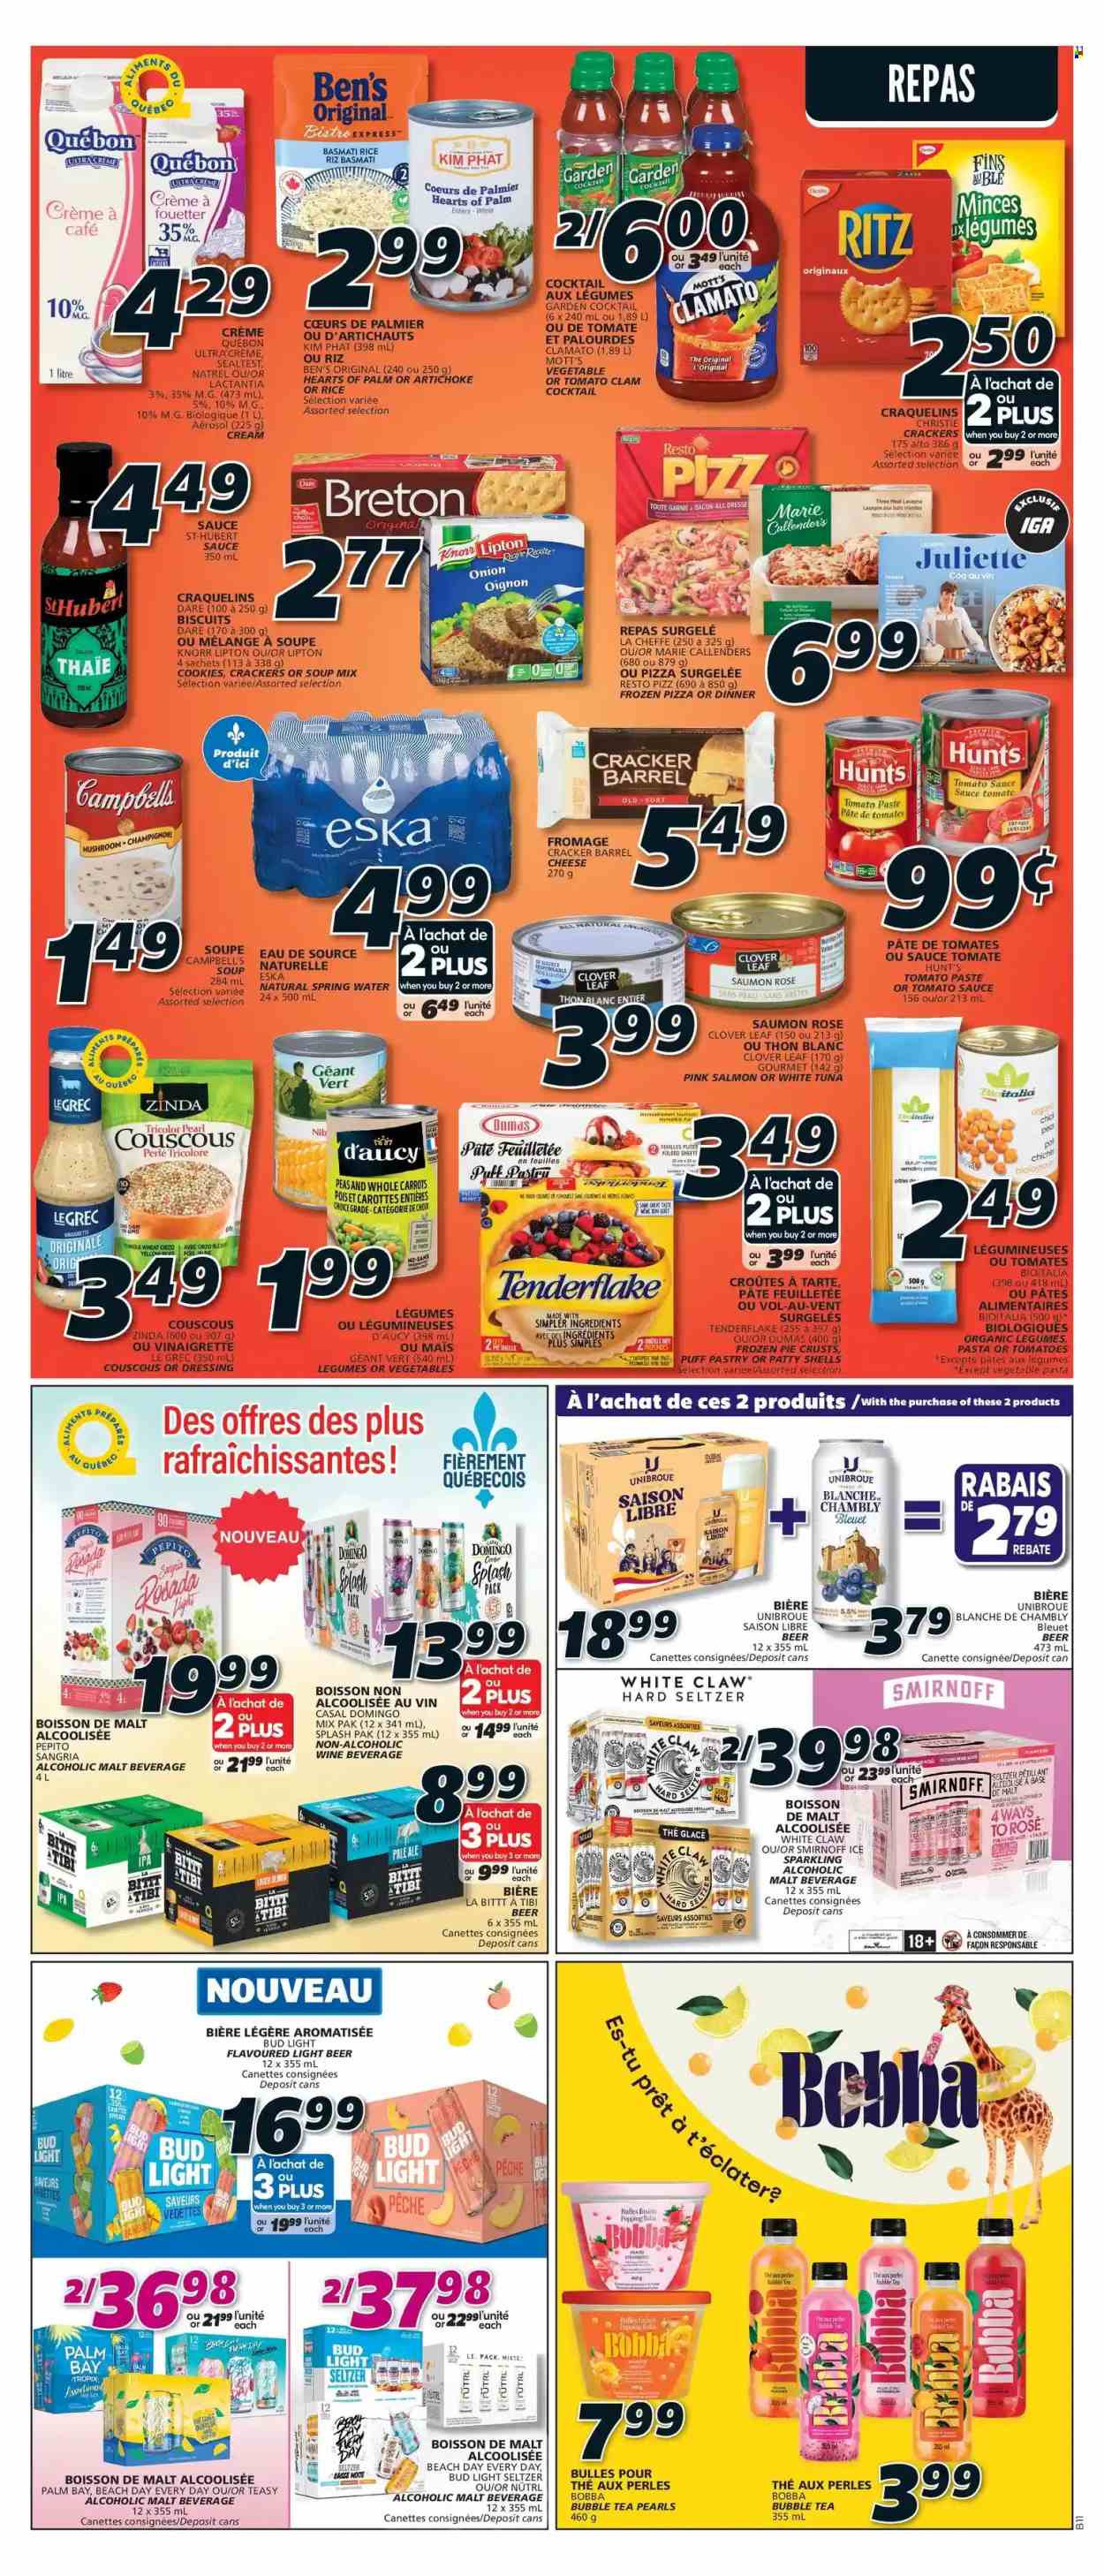 thumbnail - IGA Flyer - May 19, 2022 - May 25, 2022 - Sales products - hearts of palm, Mott's, clams, salmon, tuna, Campbell's, pizza, soup mix, soup, lasagna meal, Marie Callender's, bacon, Clover, cookies, crackers, biscuit, RITZ, pie crust, malt, tomato paste, tomato sauce, basmati rice, rice, vinaigrette dressing, dressing, Clamato, spring water, tea, bubble tea, rosé wine, Smirnoff, White Claw, Hard Seltzer, beer, Bud Light, Lager, IPA, couscous, Lipton, Knorr. Page 10.